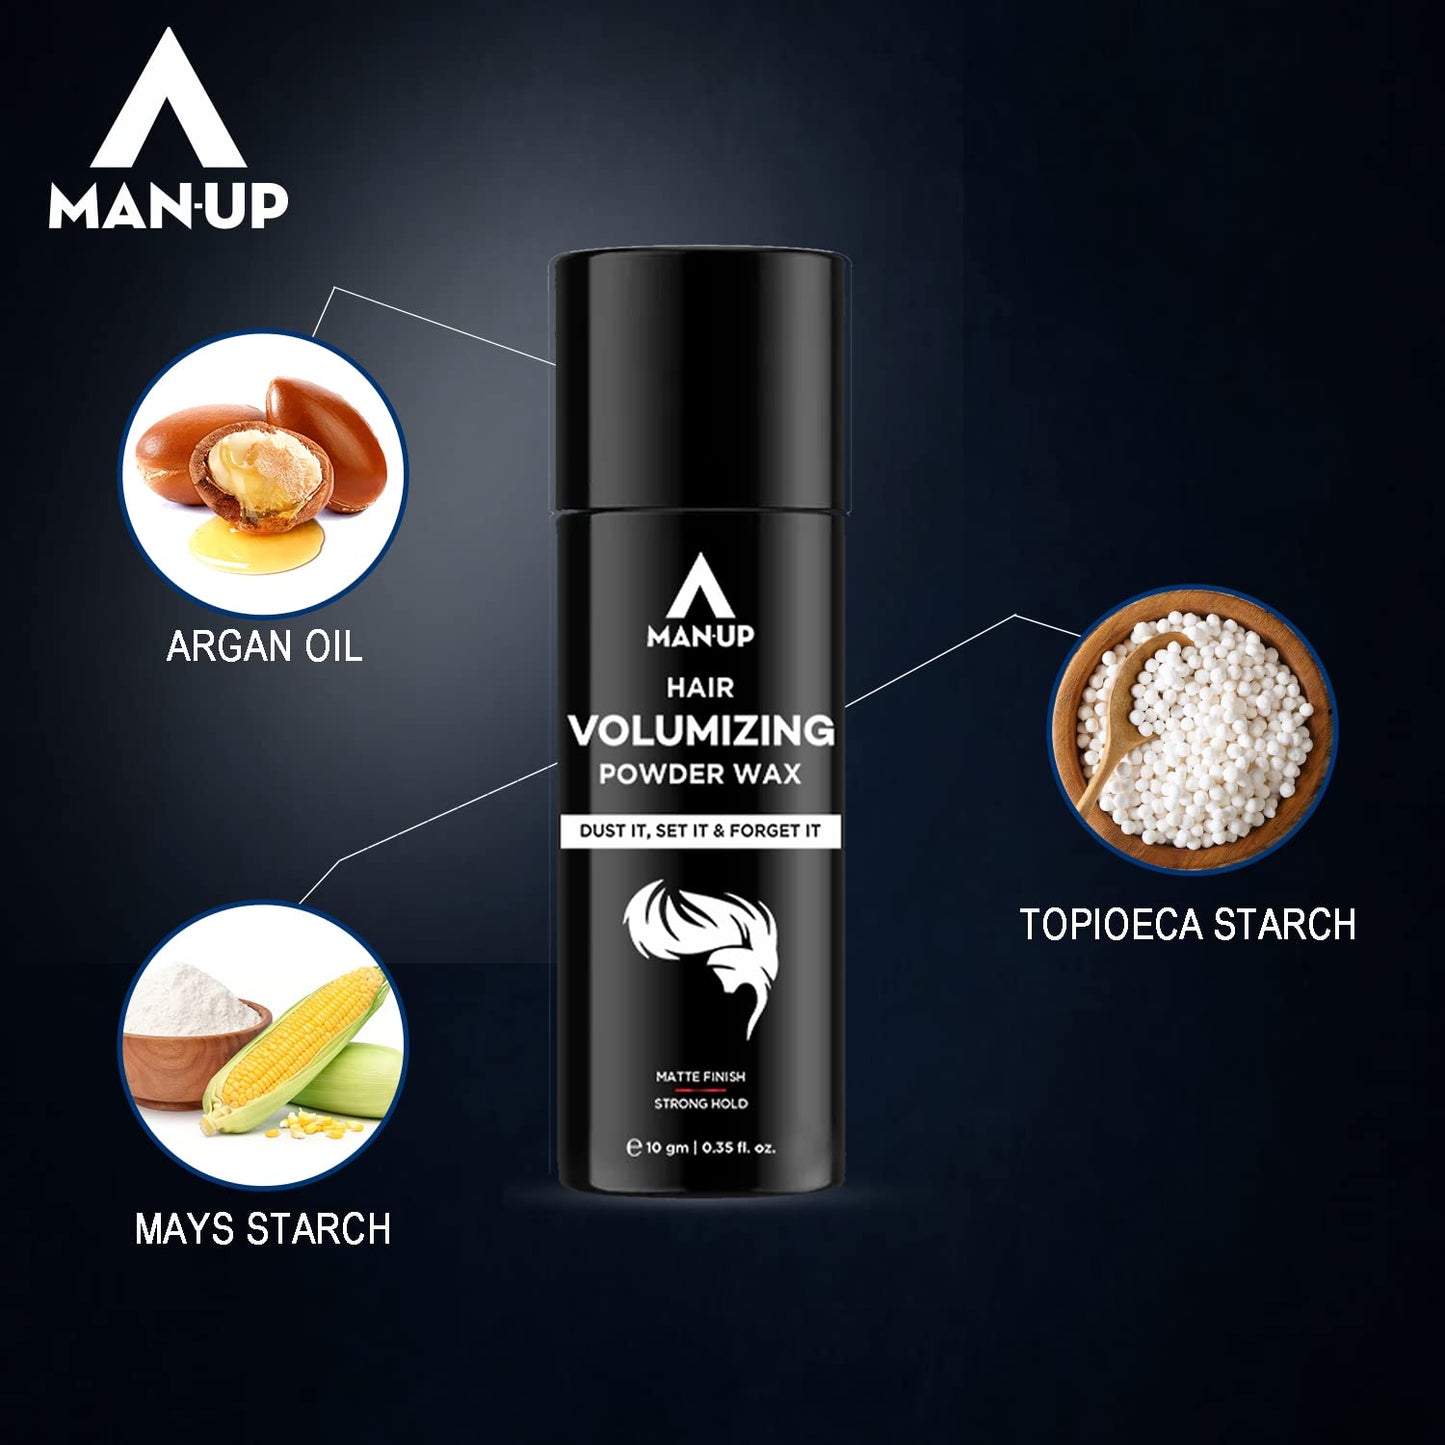 Man-Up Hair Volumizing Powder Wax For Men  Strong Hold With Matte Finish Hair Styling  All Natural Hair Styling Powder  For All Hair Types - 10gm Pack of 5